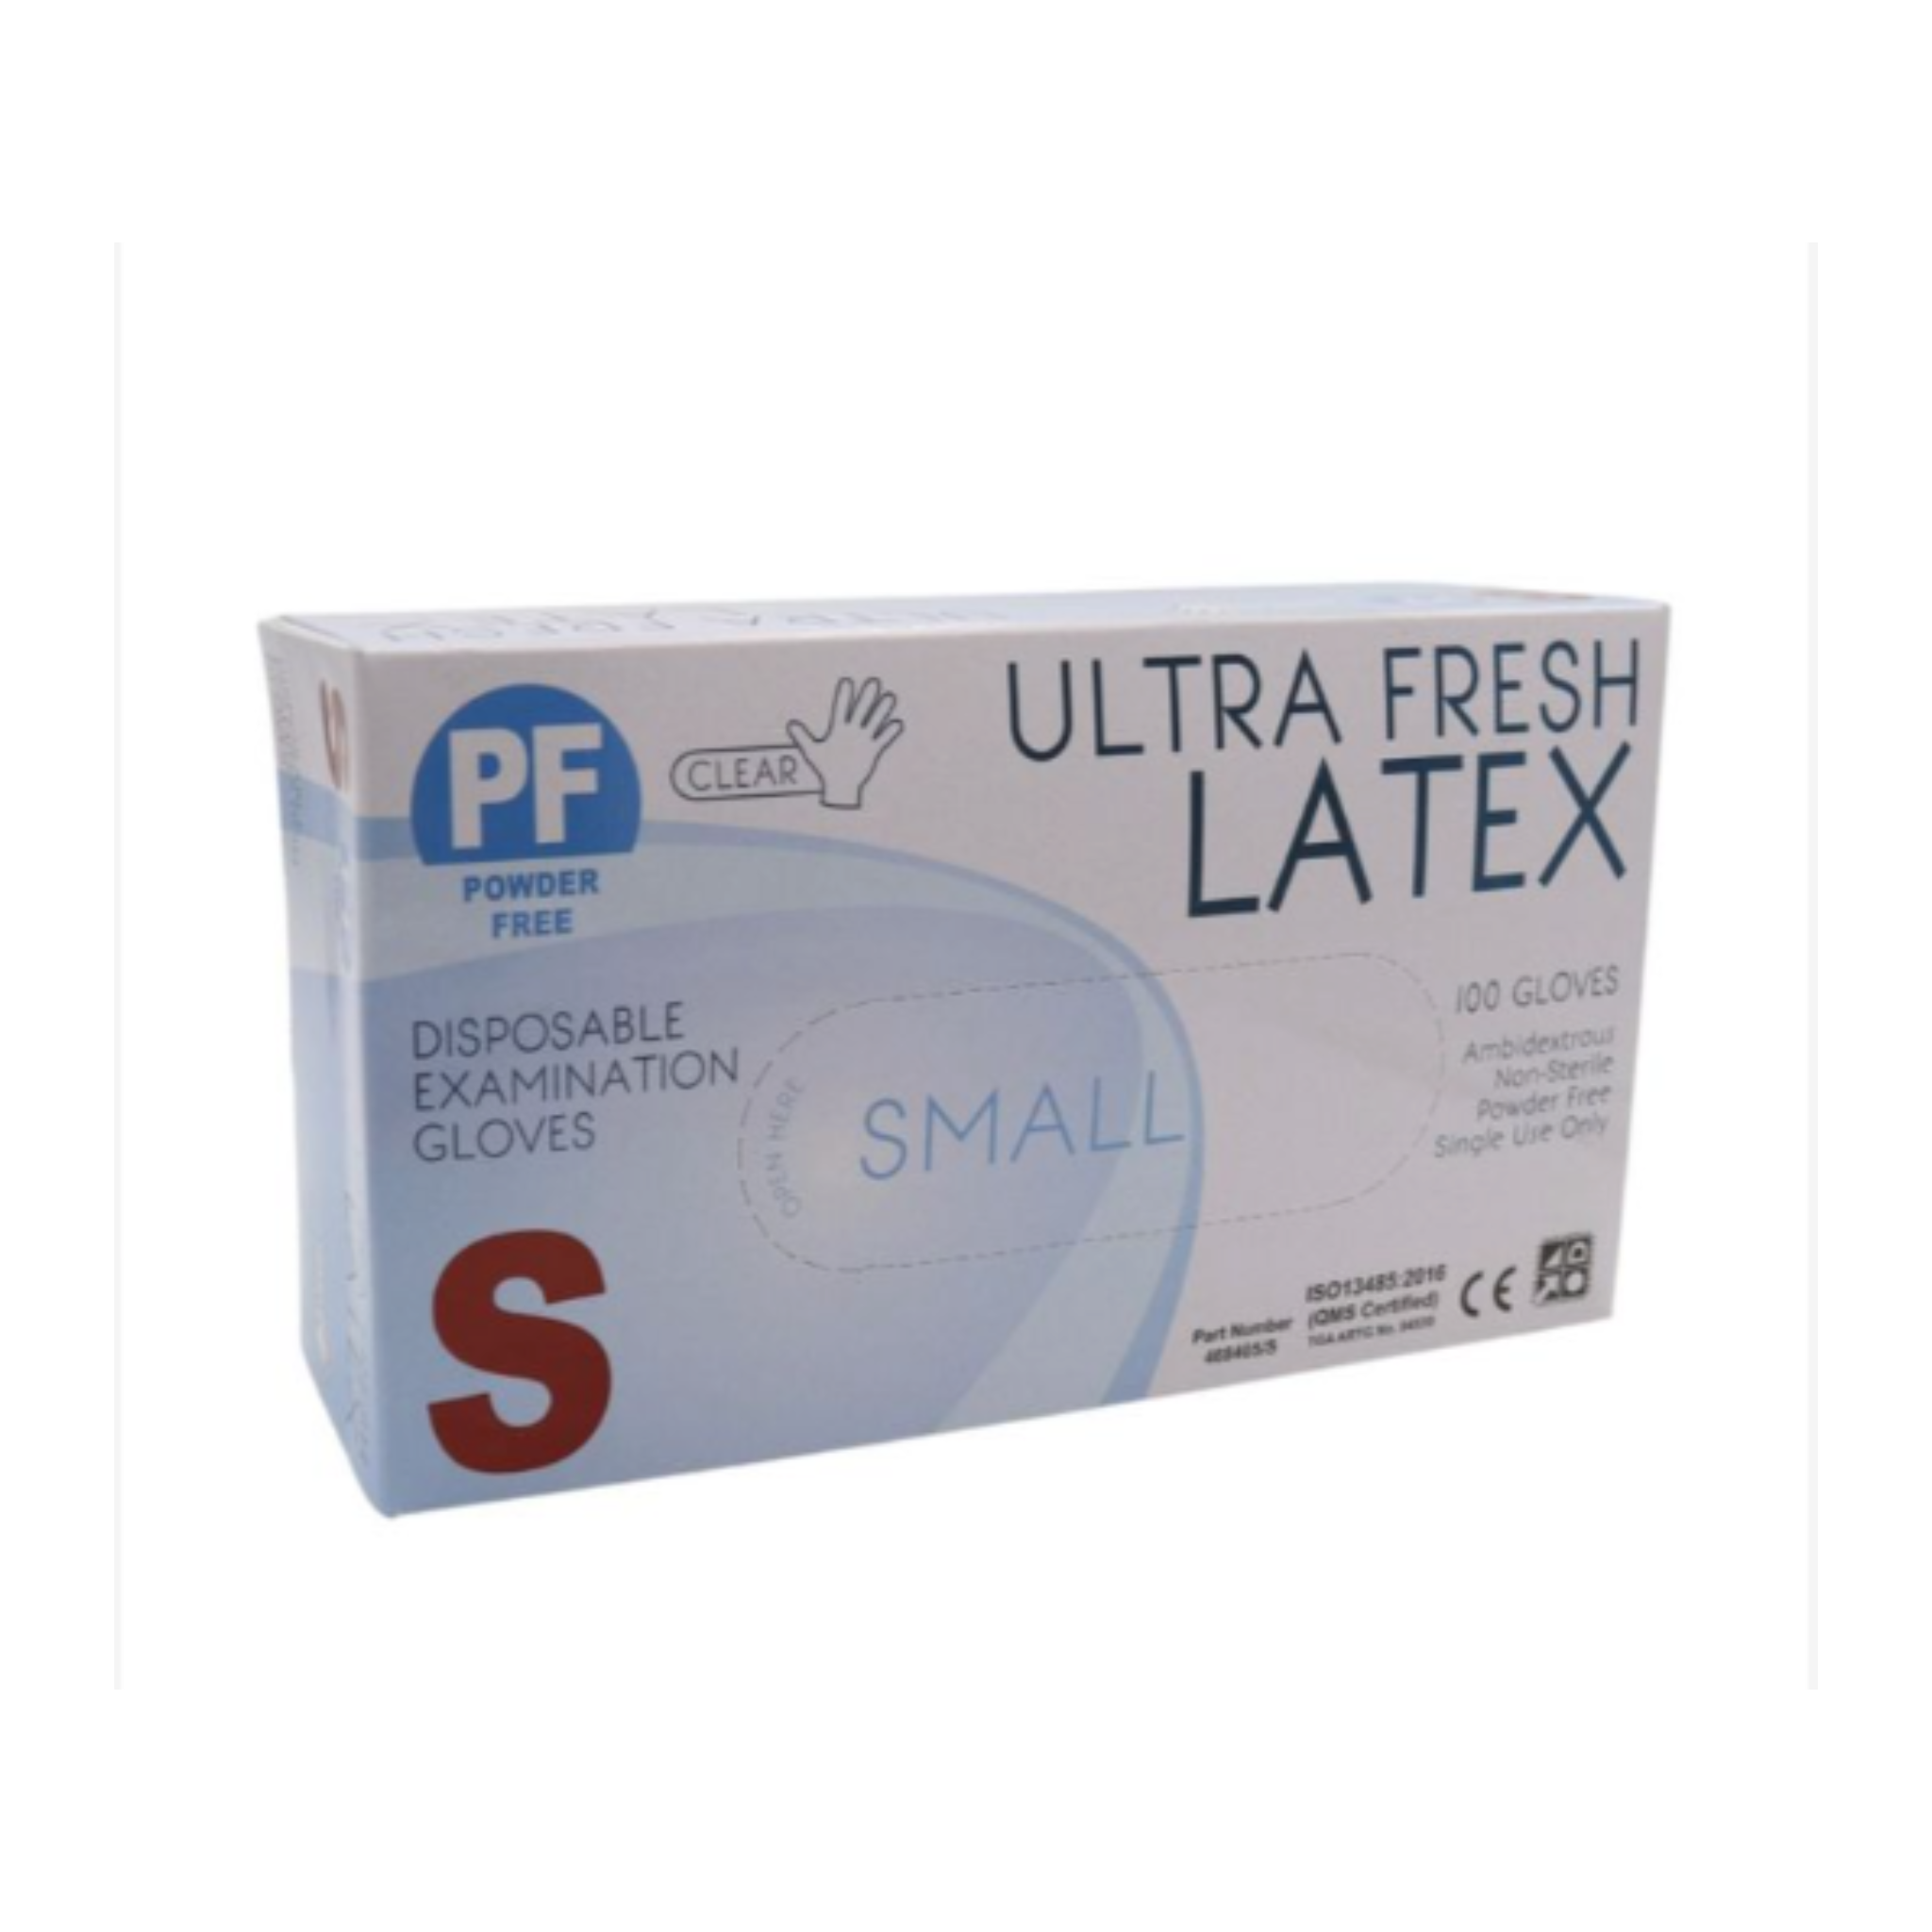 Latex Gloves P/F 10x100's - Small